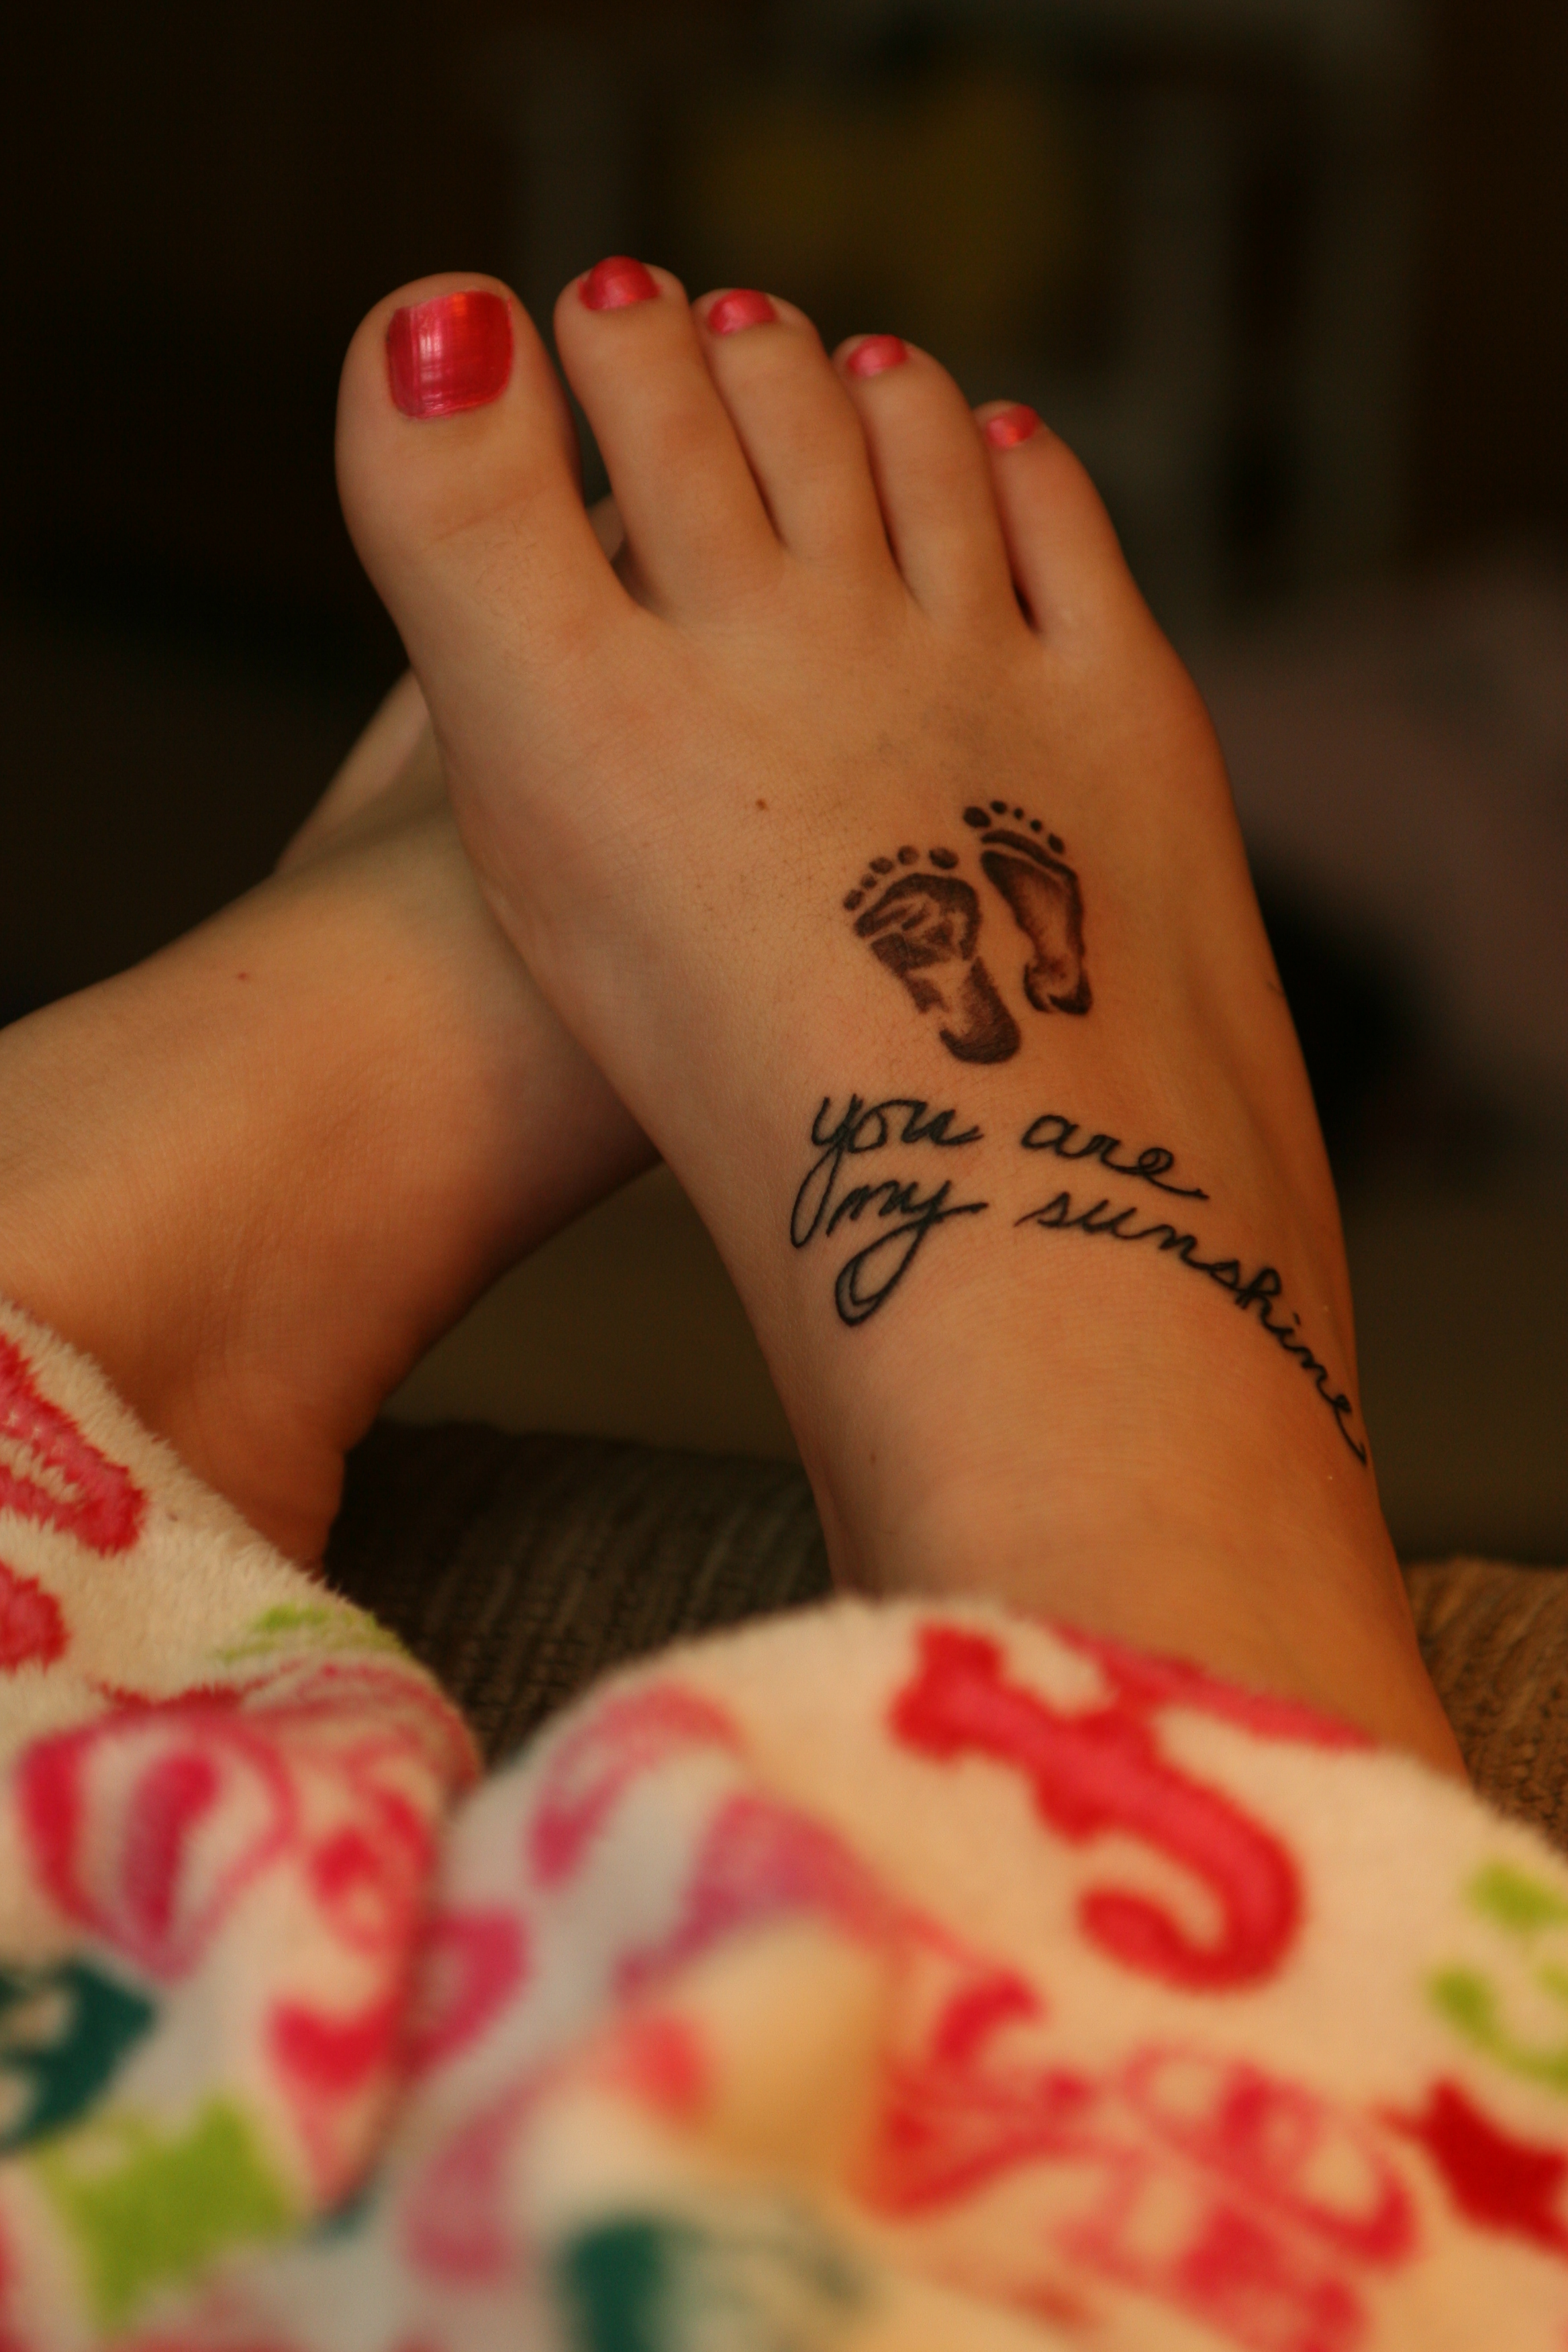 Footprint Tattoos Designs, Ideas and Meaning | Tattoos For You